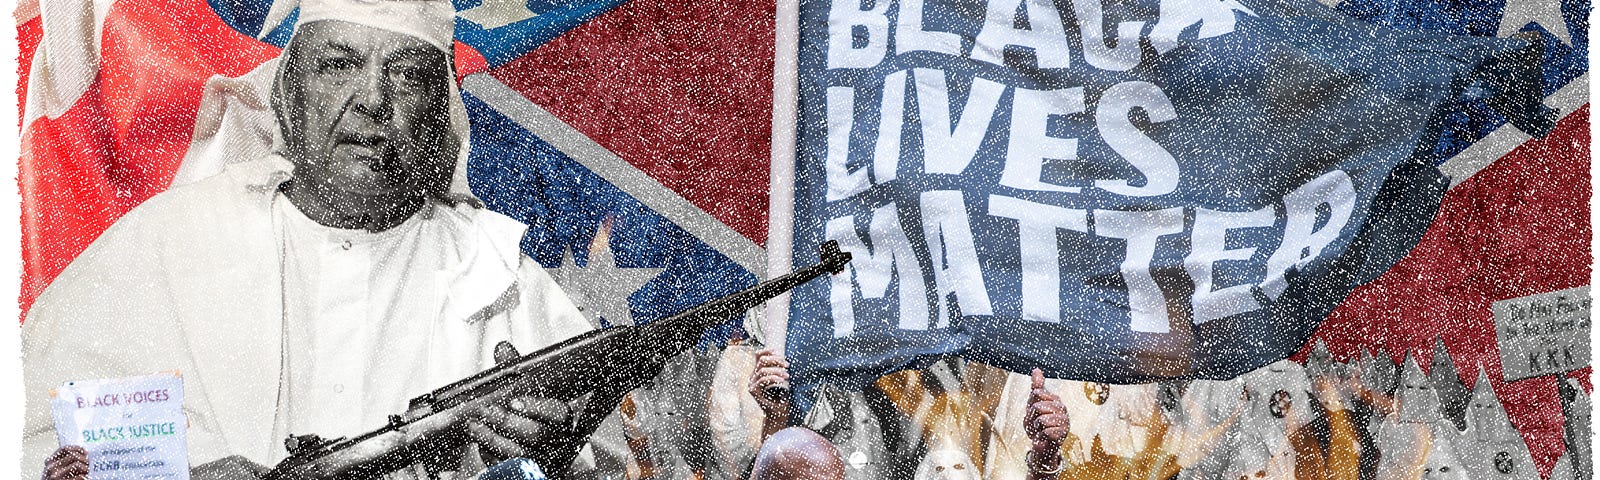 Montage of images include BLM and Klan